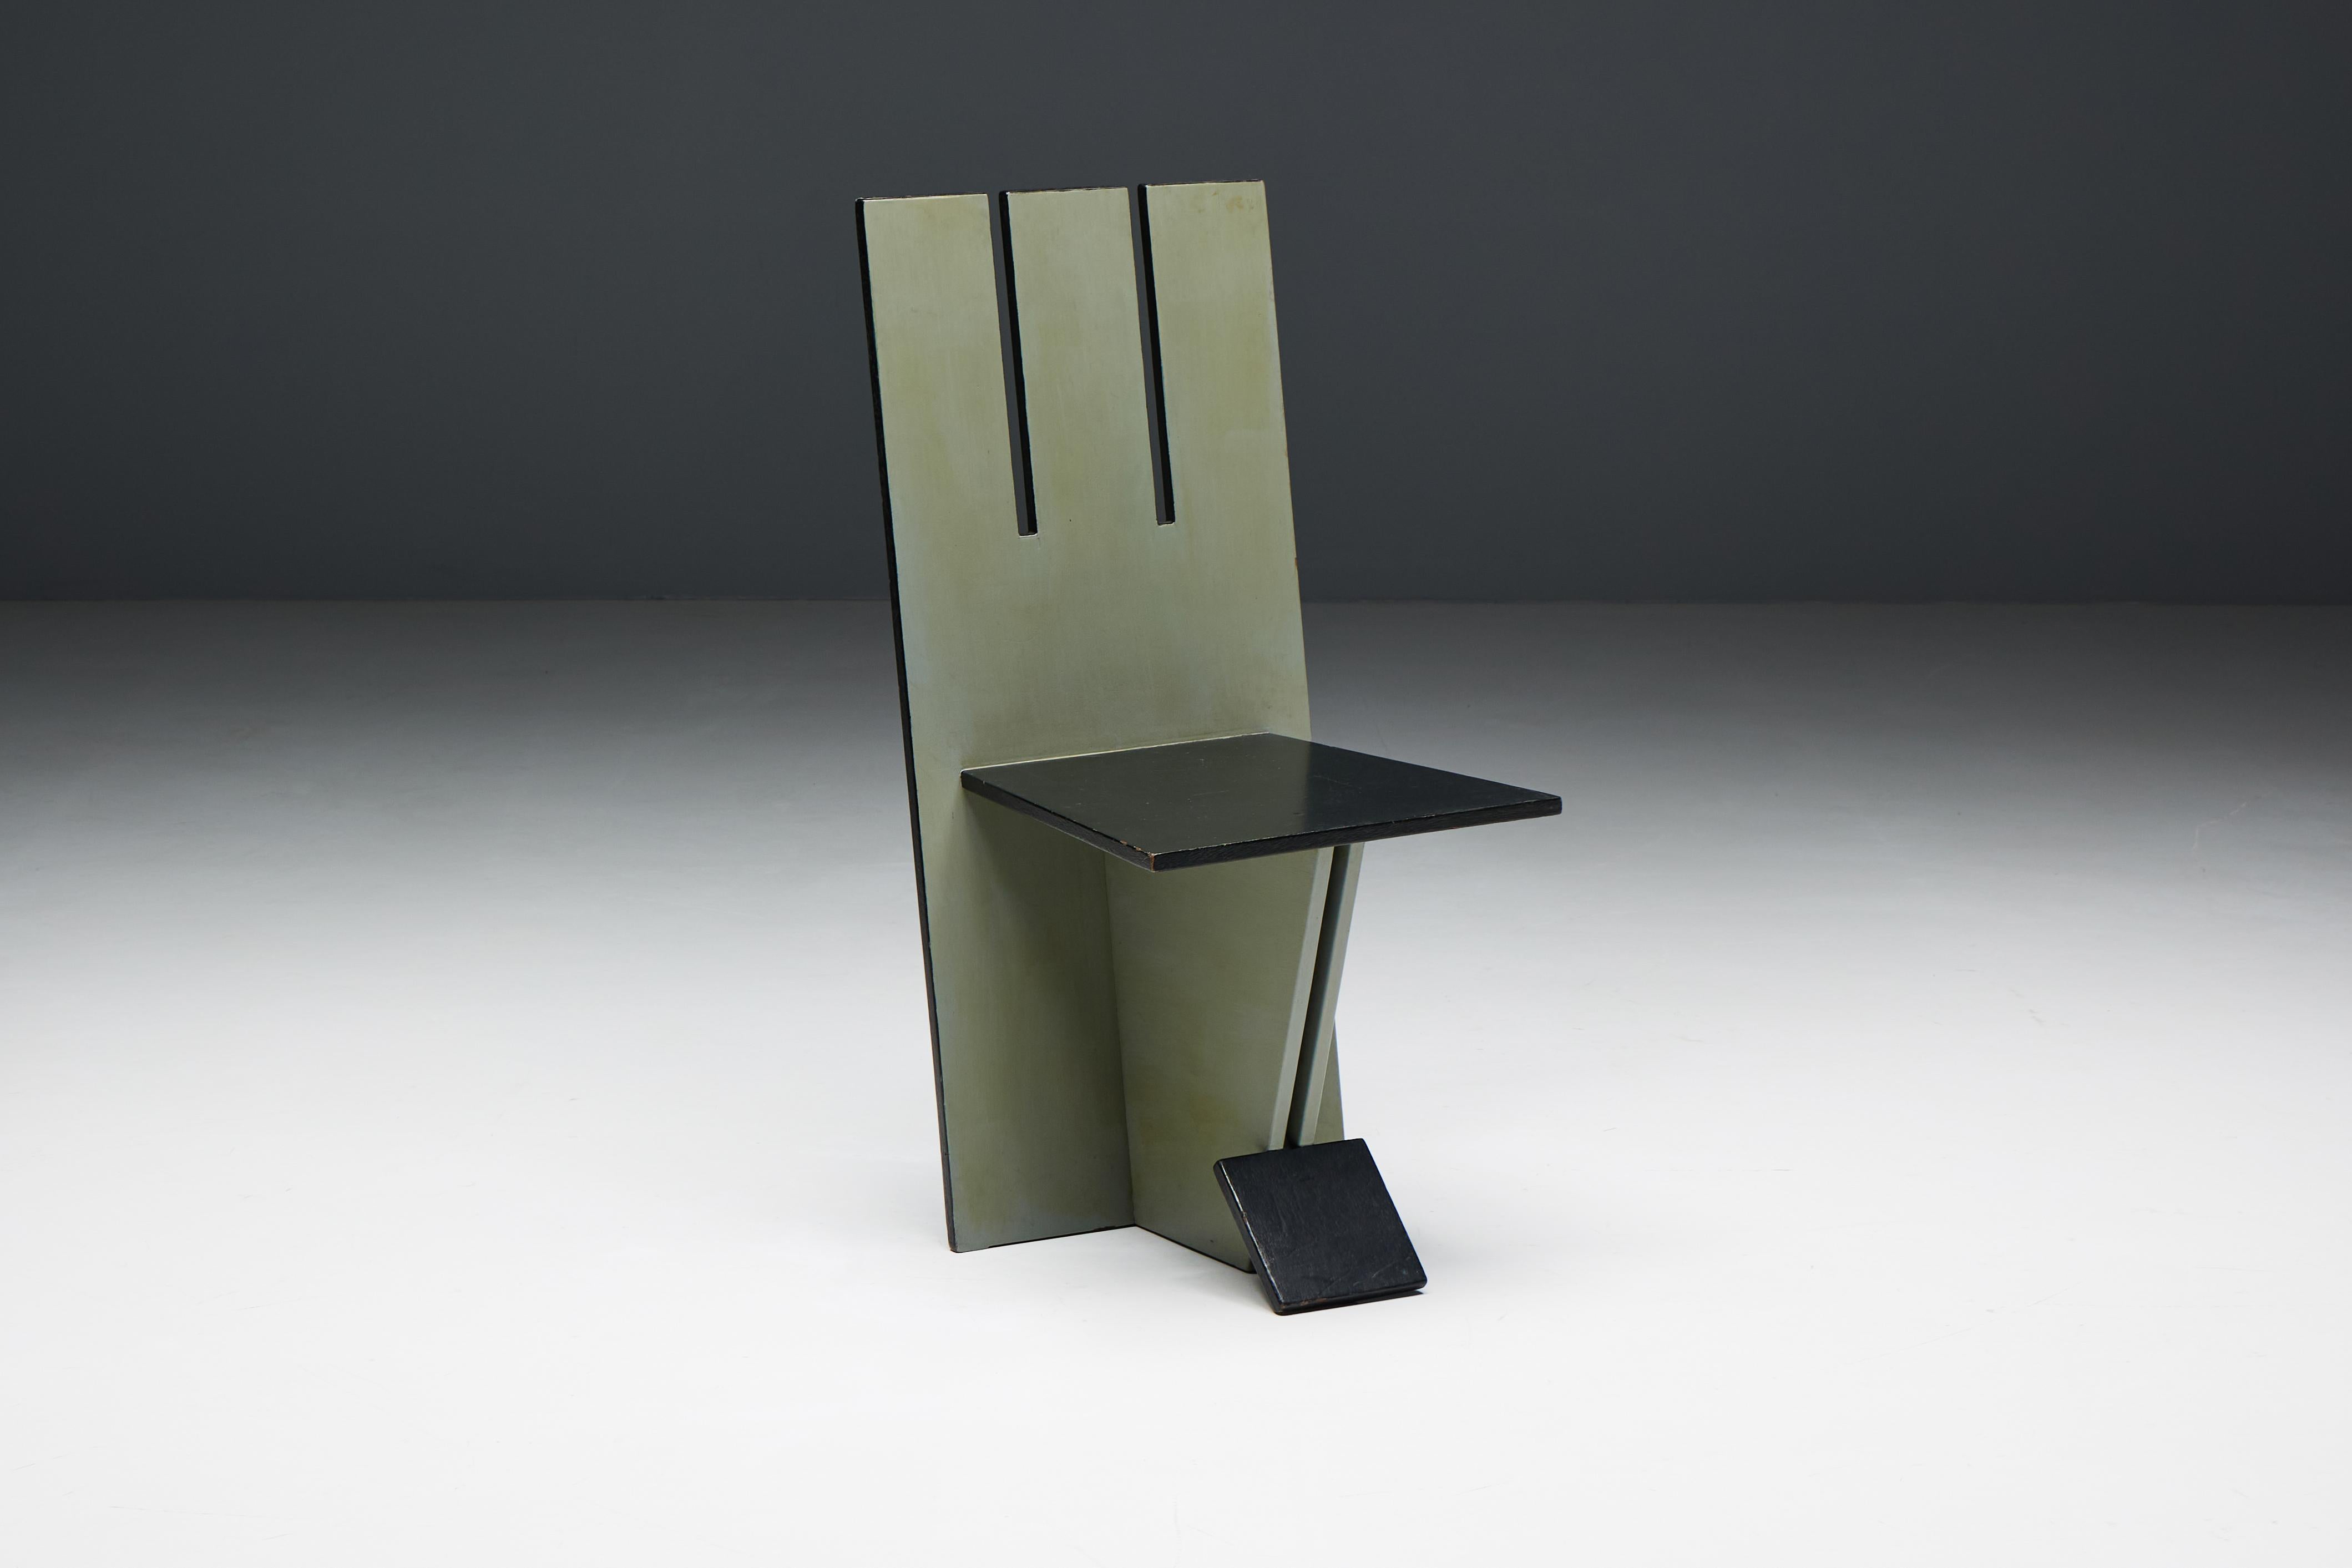 Dining Chairs in the style of De Stijl Movement, Netherlands, 1950s For Sale 14